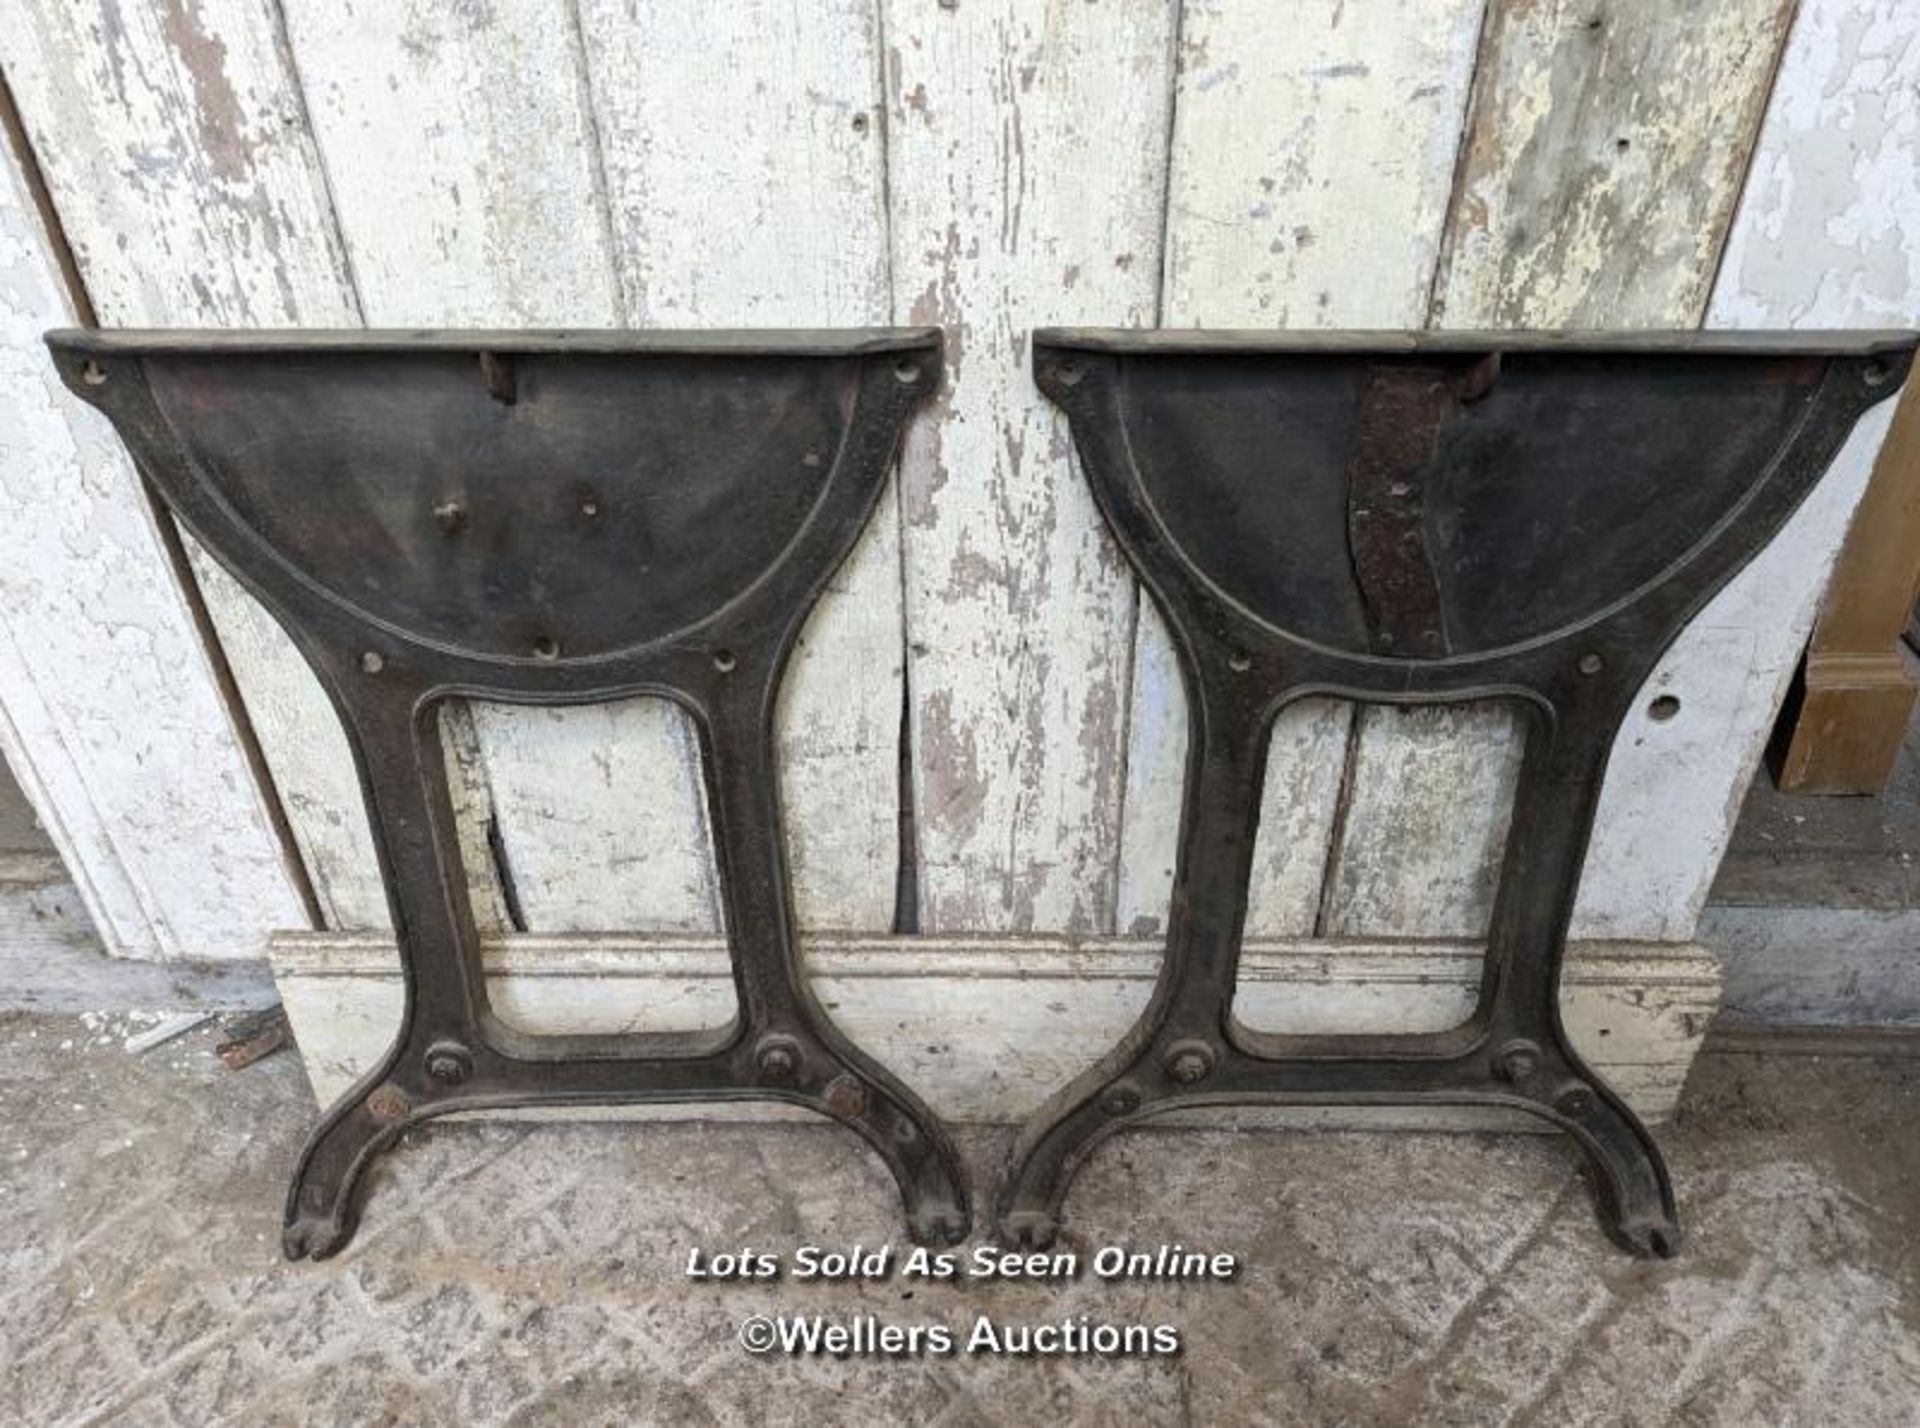 2 pairs of cast iron table base ends. These are 77cm high so good for tables. Width at top of base - Image 4 of 6